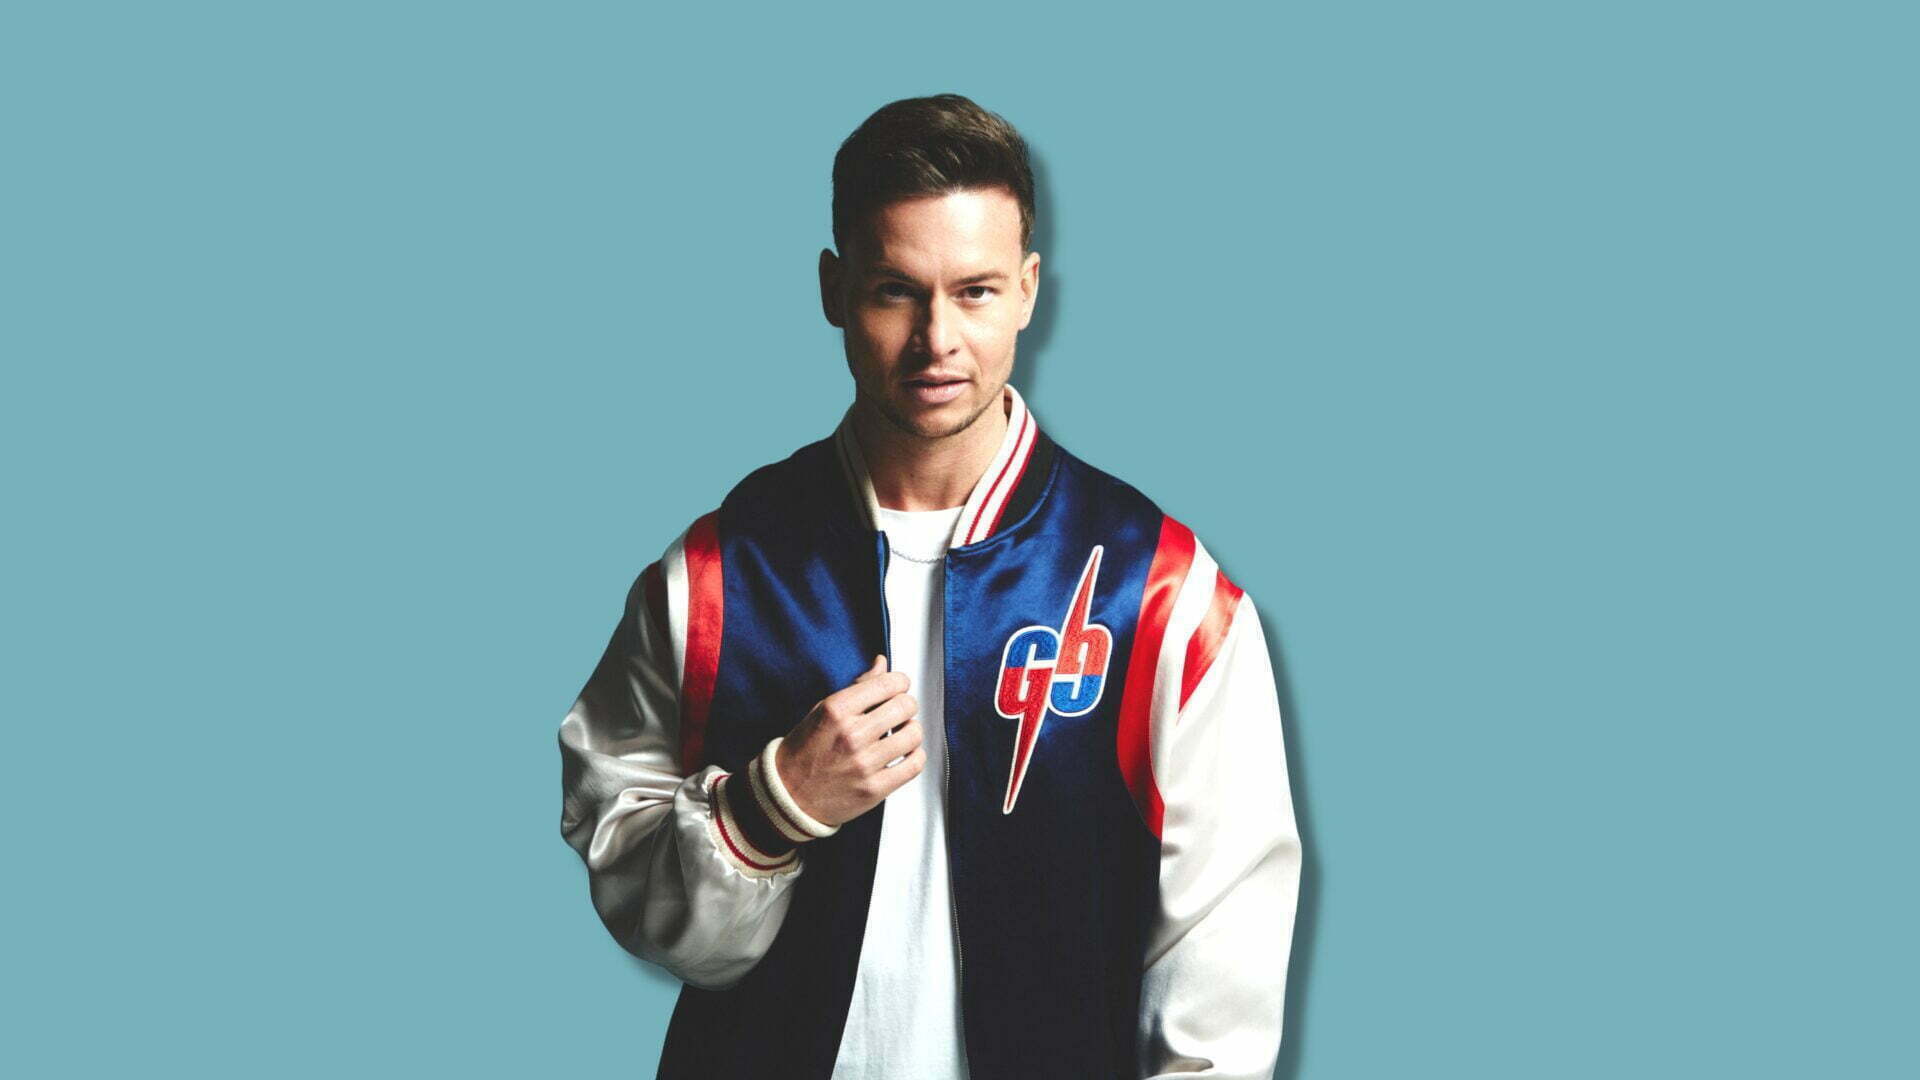 Joel Corry and Caity Baser Unite on Feel-Good Summer Track - 'Dance Around It'! Soundrive Music